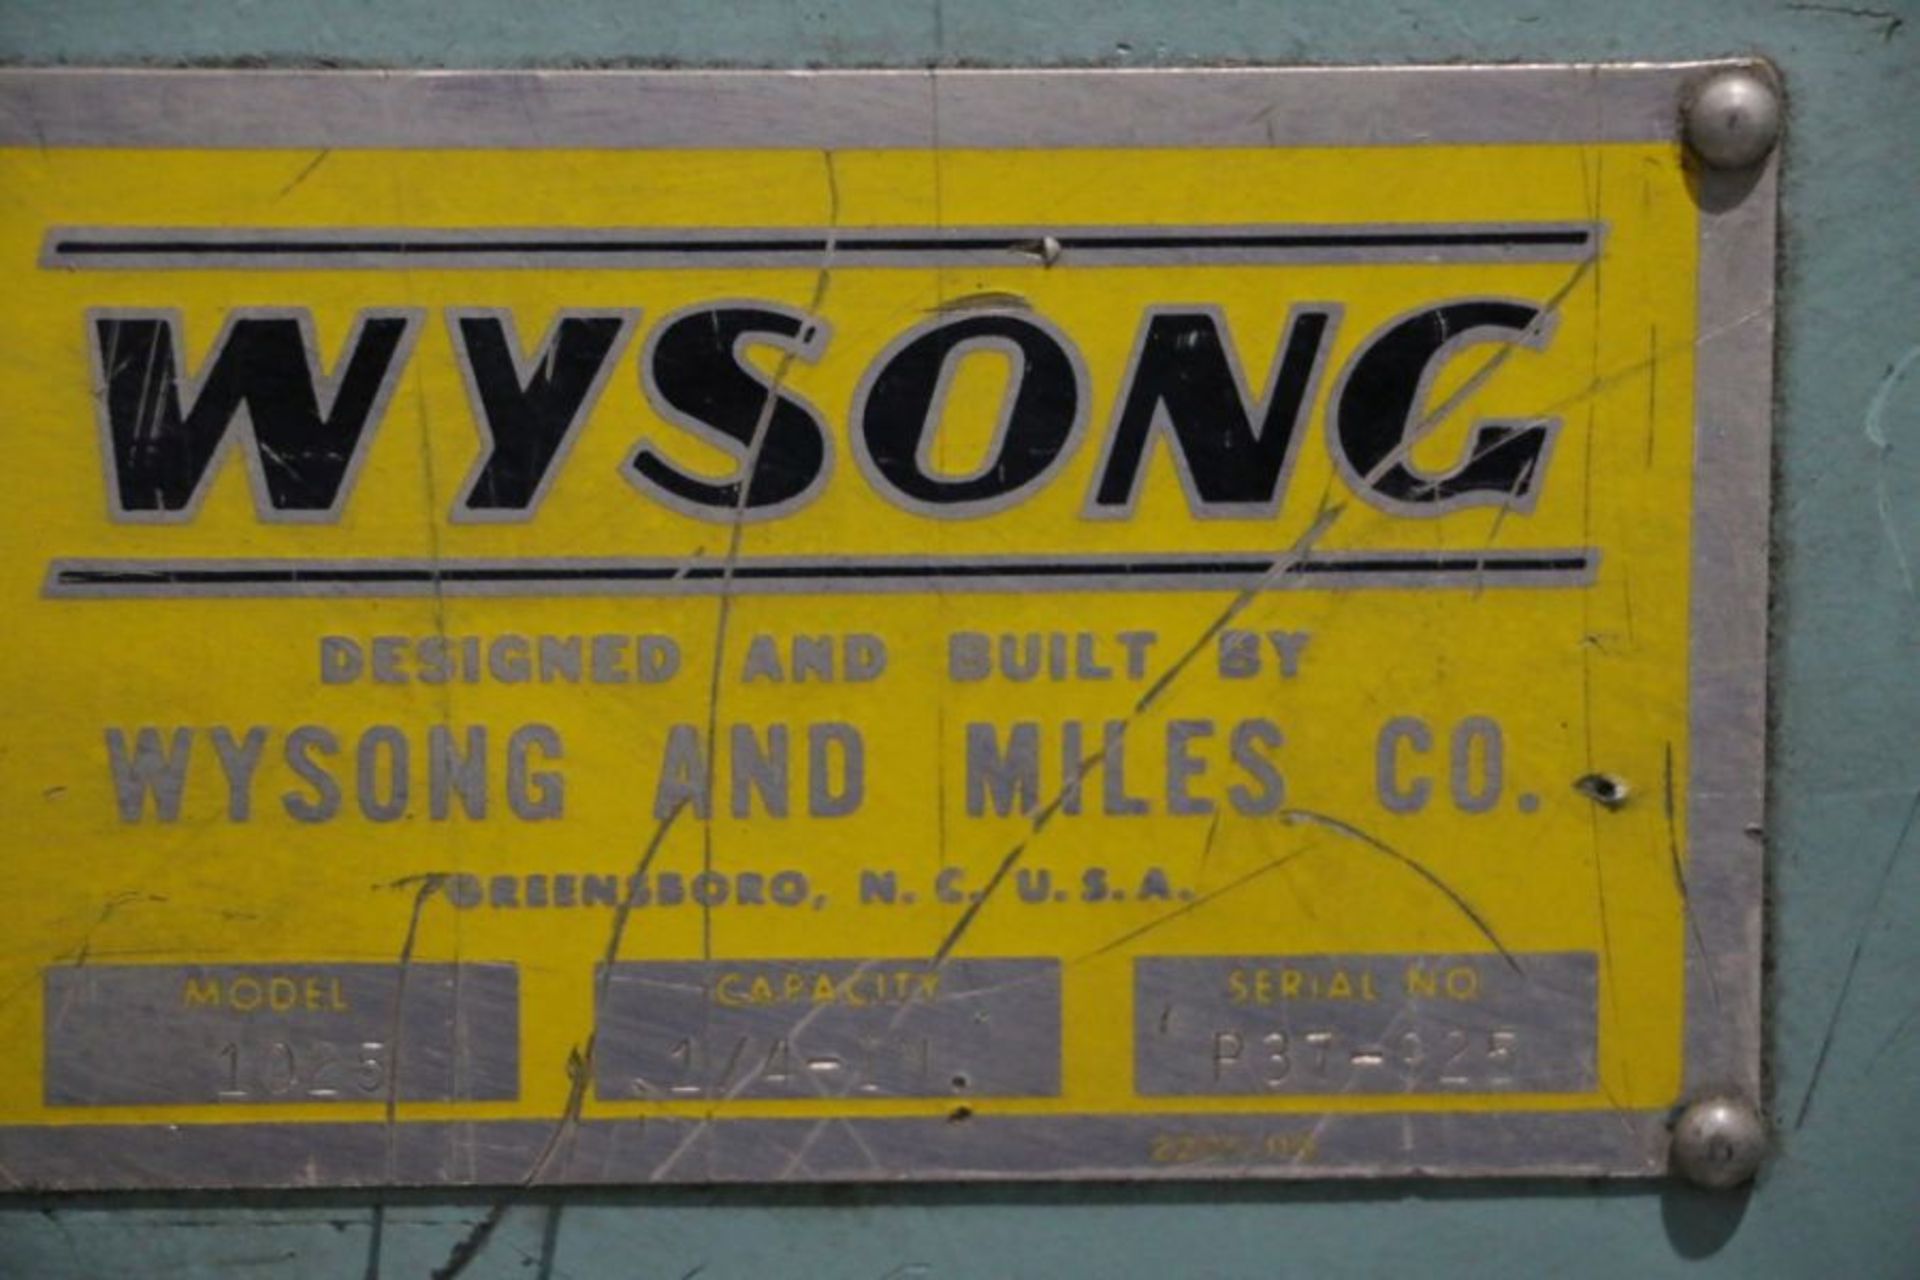 Wysong 1025 Shear, Wysong Computerized Gauging System Control, 1/4" Cap., s/n R37-925 - Image 9 of 9